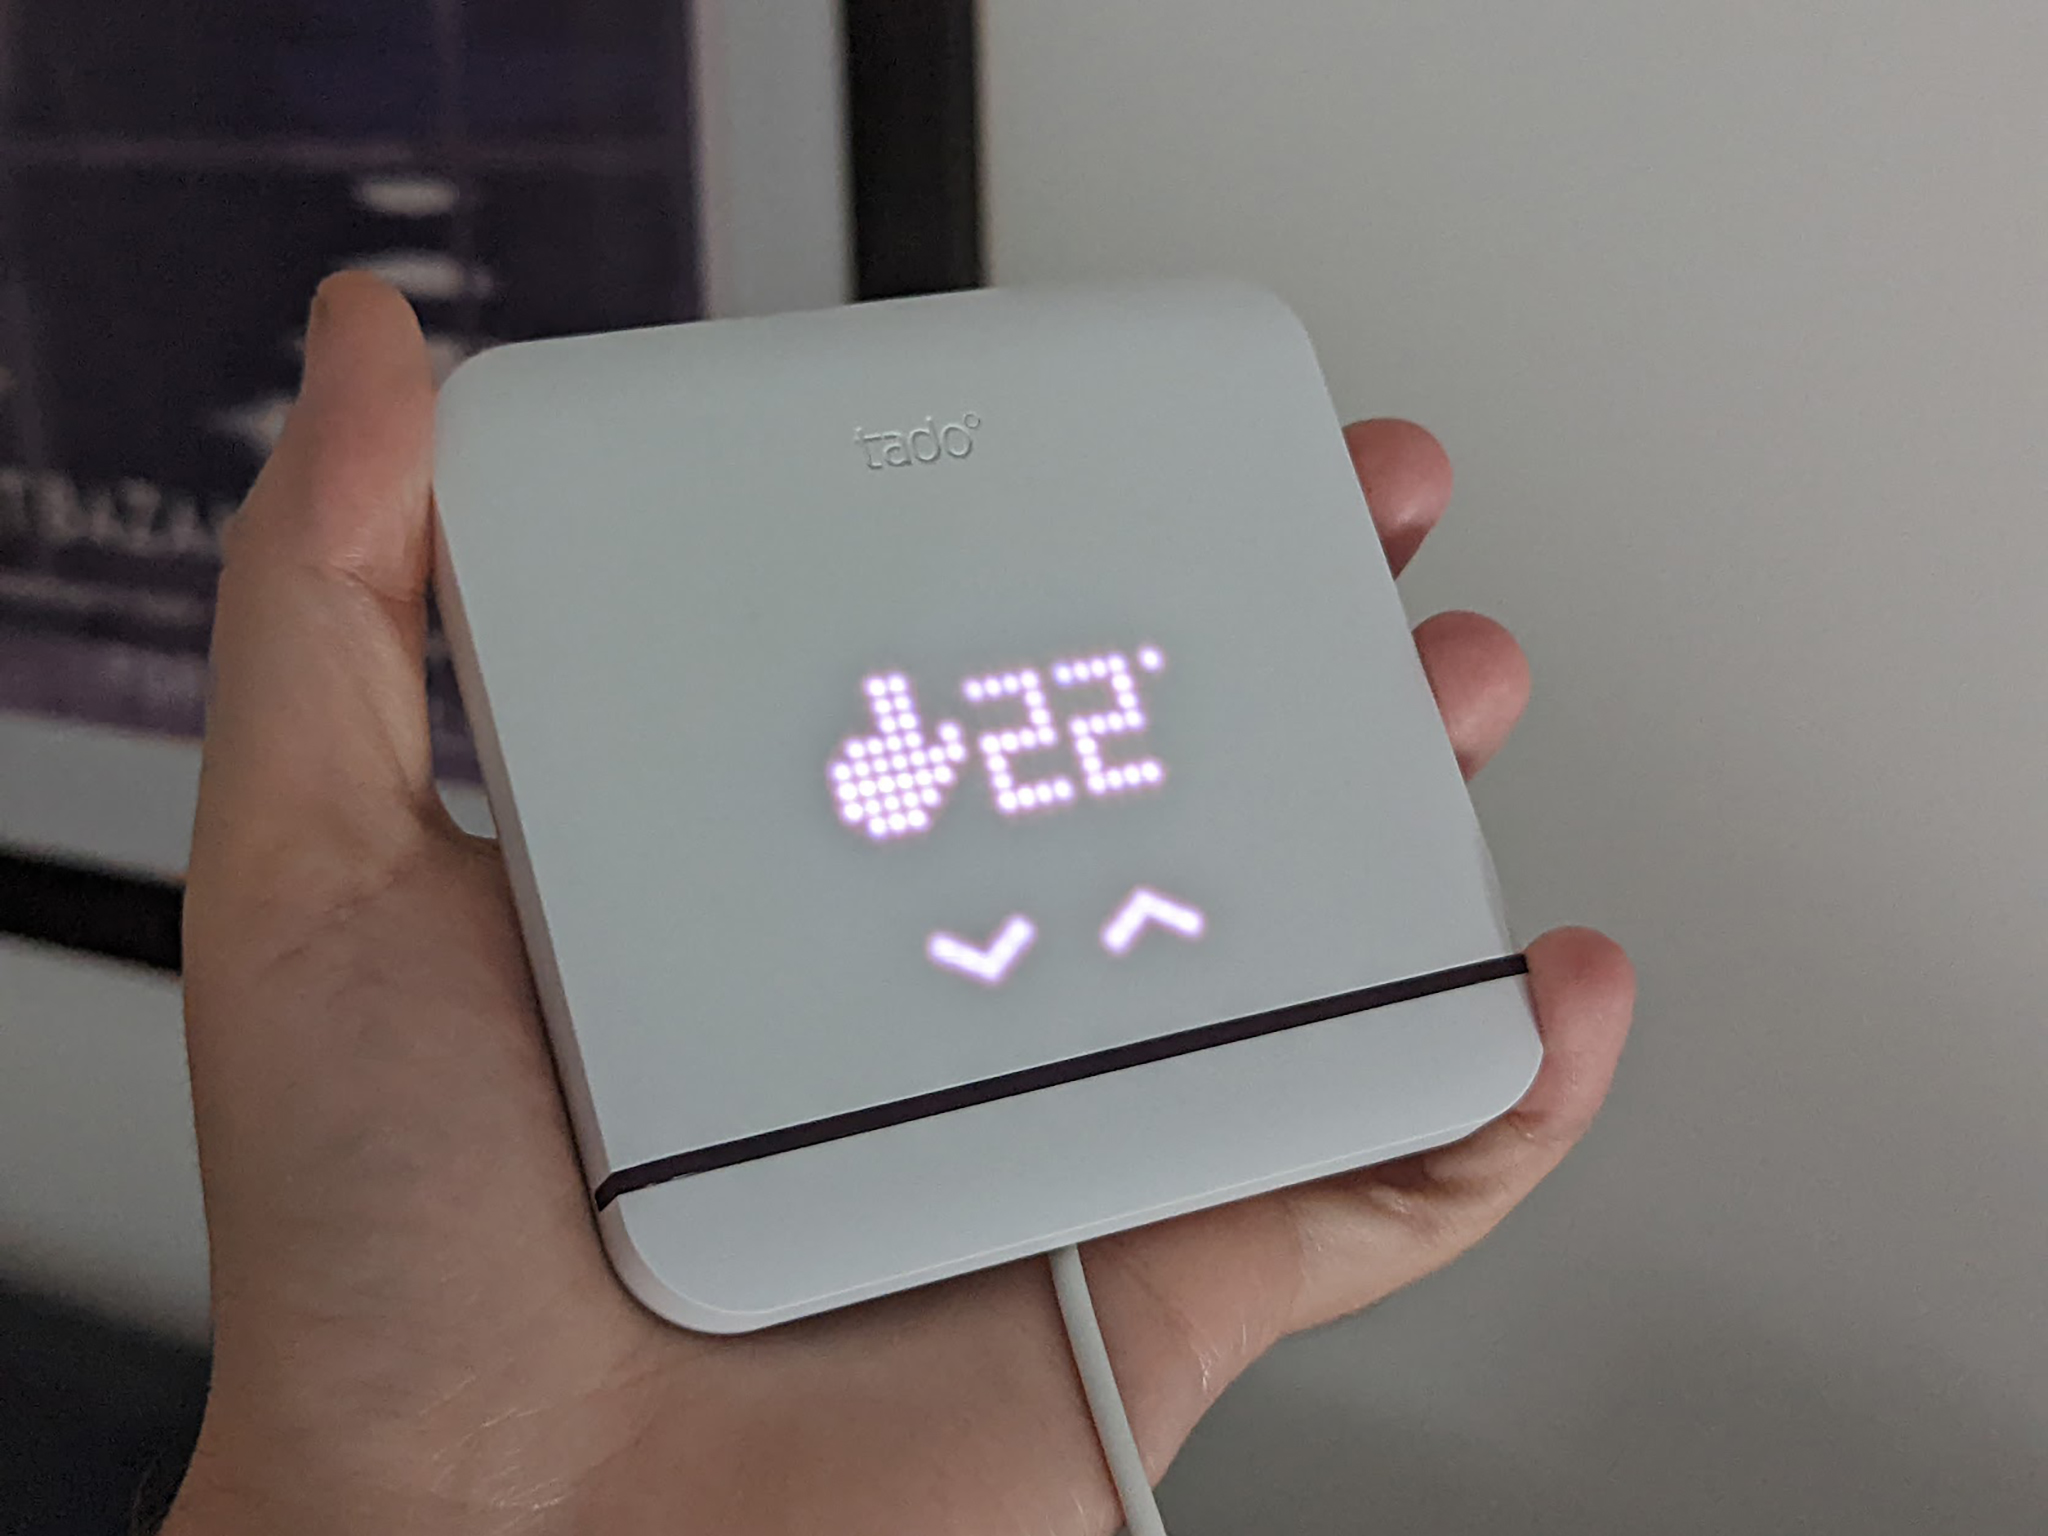 Win a complete smart home thermostat setup from Tado!